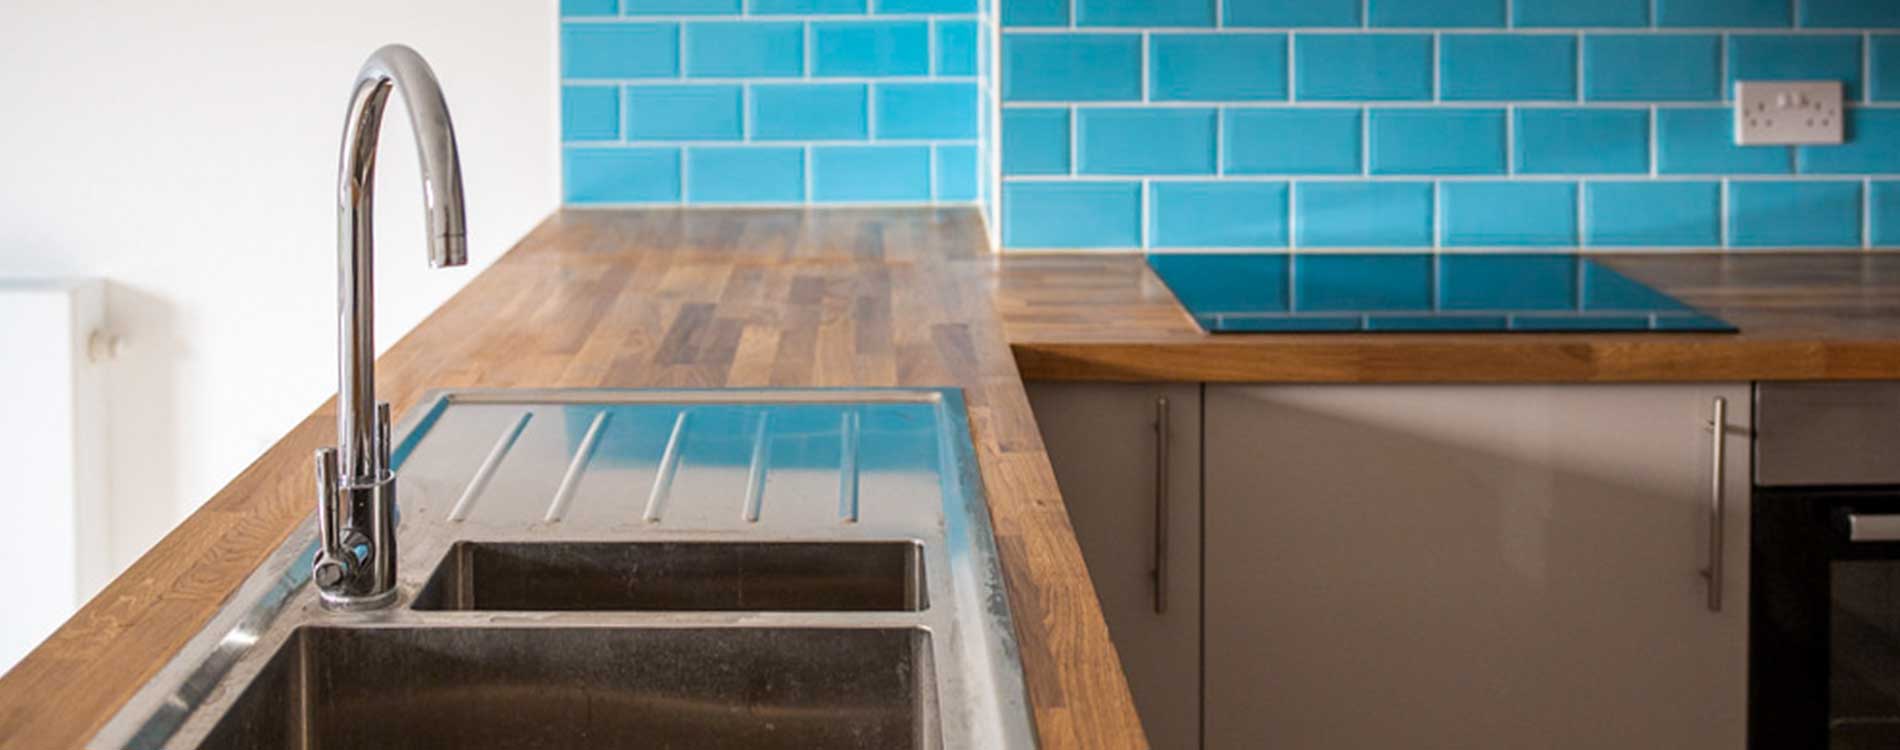 kitchen sink and blue tiled wall inside a brent housing conversion